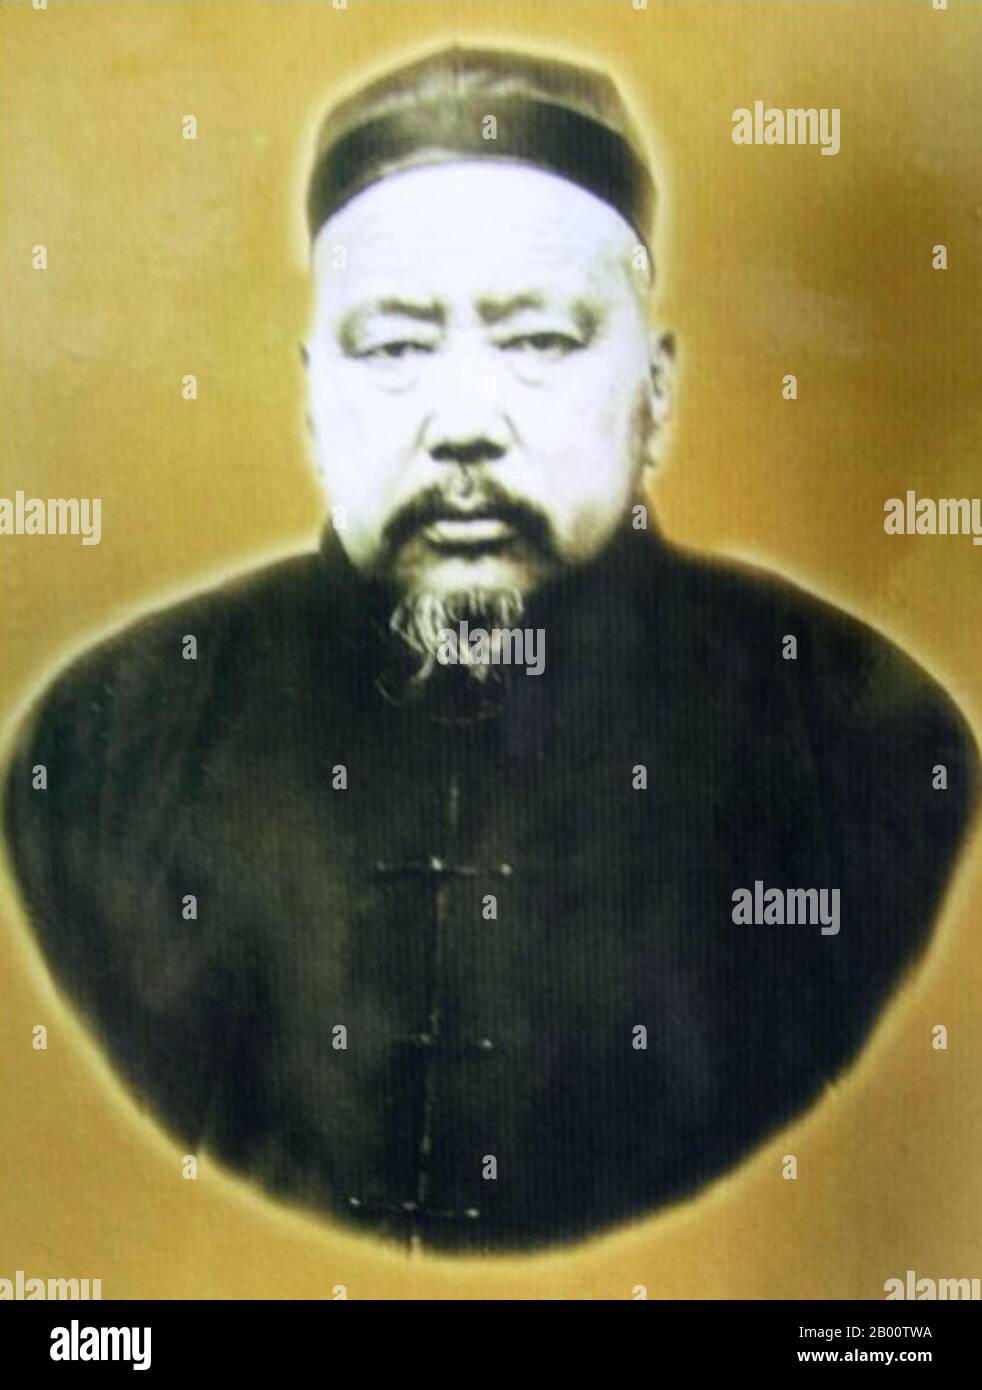 China: Chinese Muslim warlord General Ma Qi (1869-1931), ruler of Qinghai 1915-1931.  Ma Qi was a warlord in early 20th century China. A Muslim Hui, he was born in 1869 in Daohe, now part of Linxia, Gansu, China. He was senior commander in the Qinghai-Gansu region  since the late Qing period, and was the father of Ma Family warlords Ma Buqing and Ma Bufang. Stock Photo